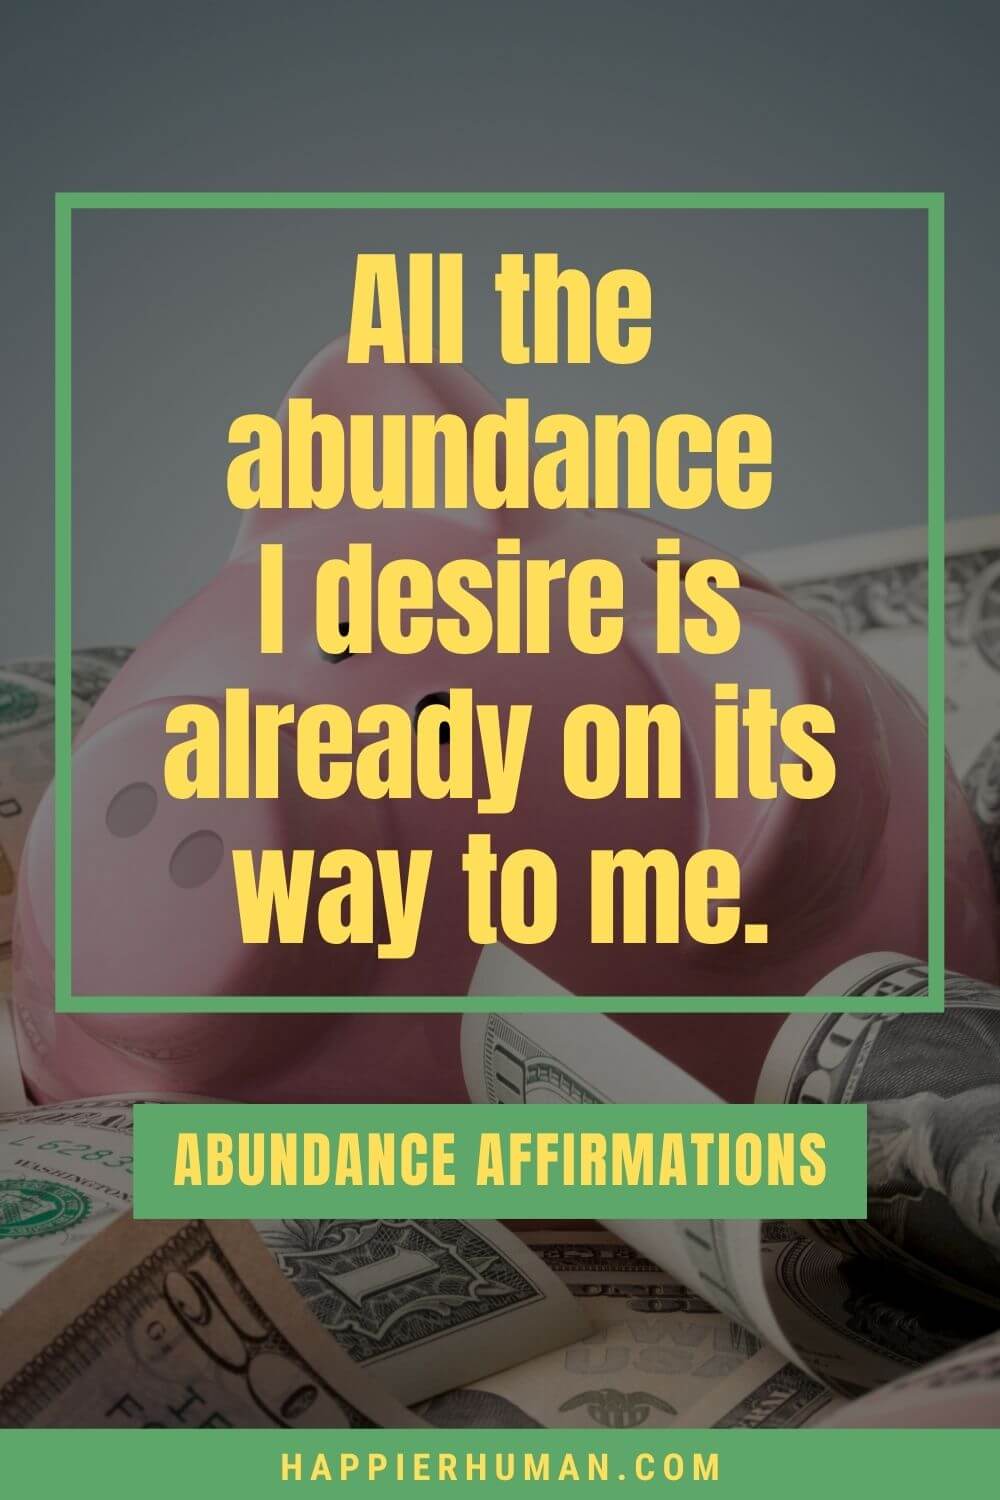 Abundance Affirmations - All the abundance I desire is already on its way to me. | 7 most powerful money affirmations | morning affirmations for abundance | law of attraction affirmations for money